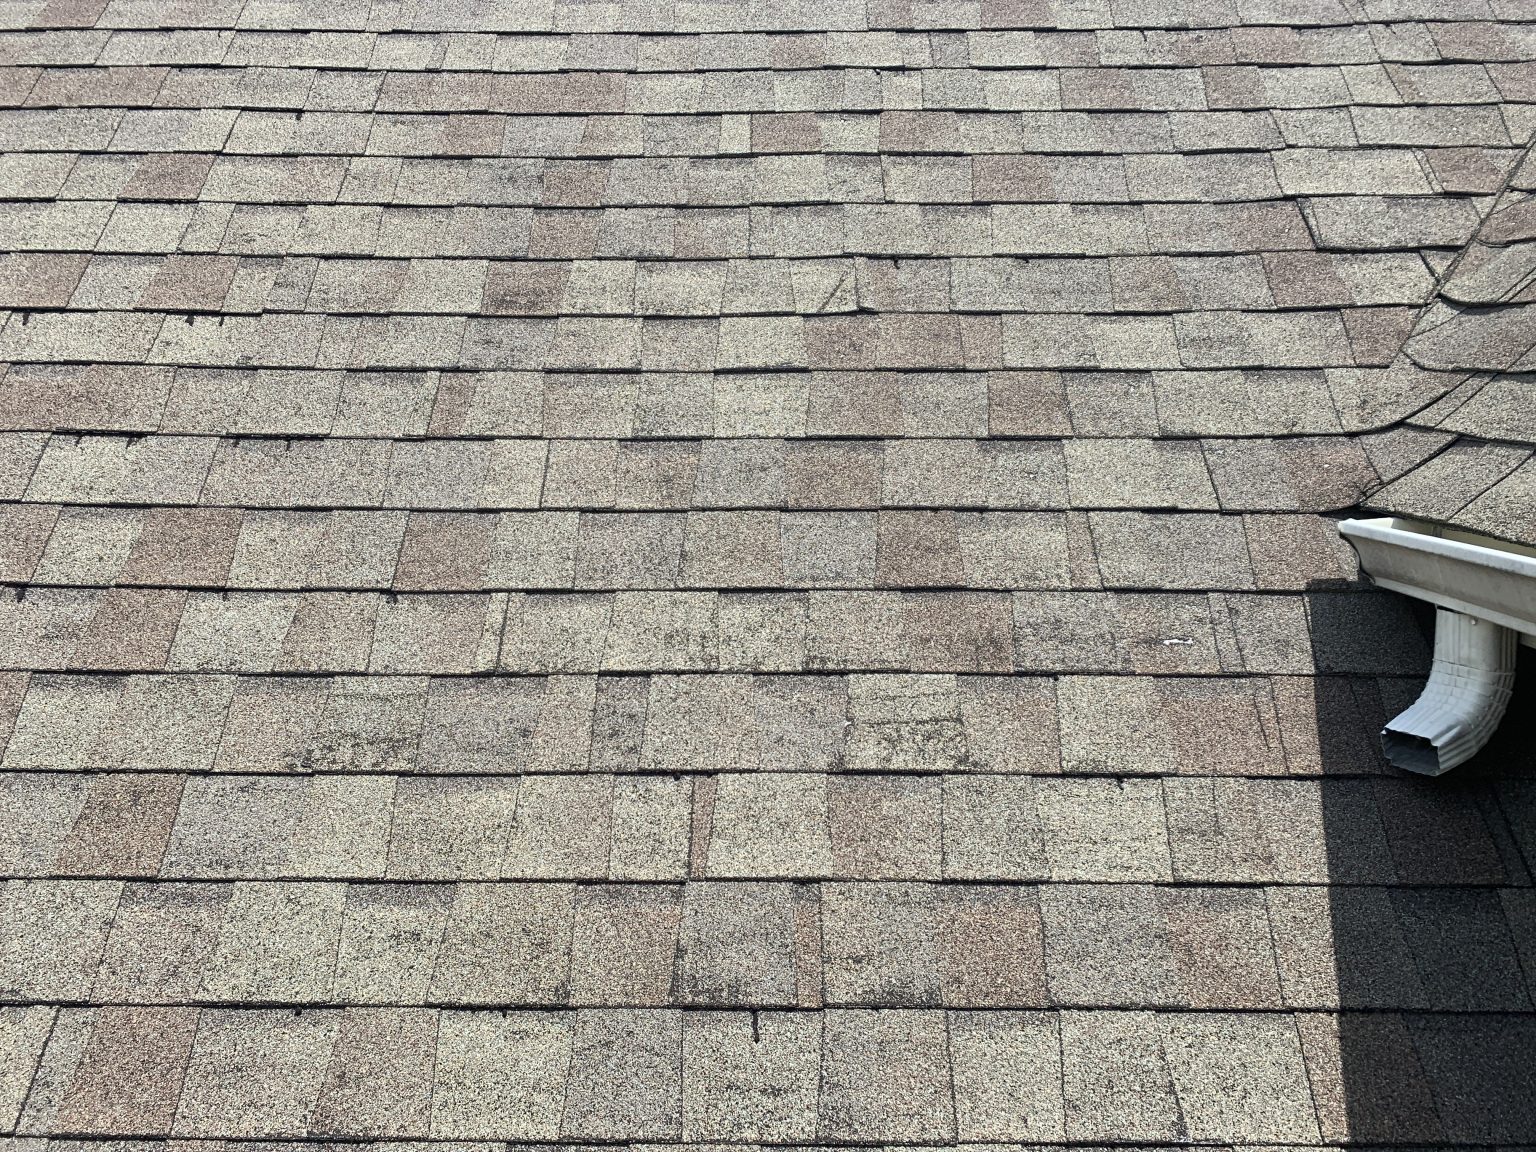 Hail damage on architectural dimensional shingles